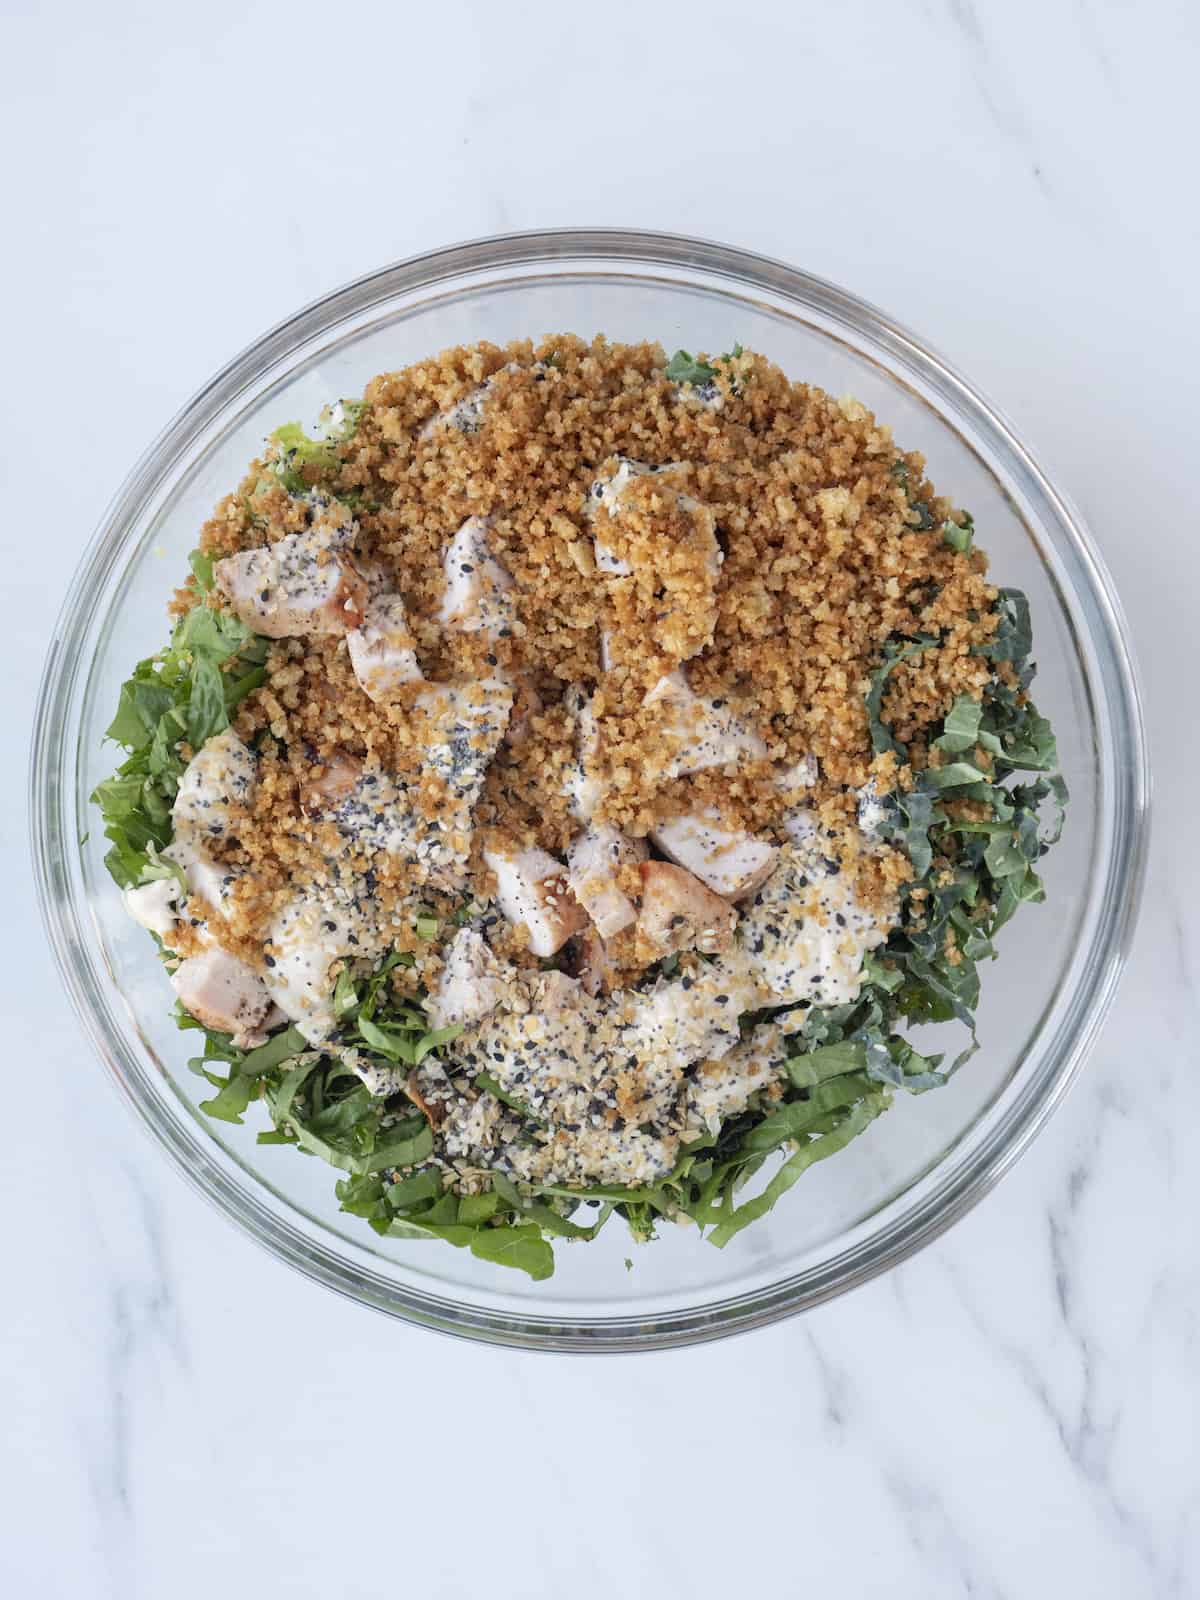 A large glass mixing bowl with ingredients for chicken caesar wrap filling, shredded greens, grilled chicken, bread crumbs and tahini dressing.